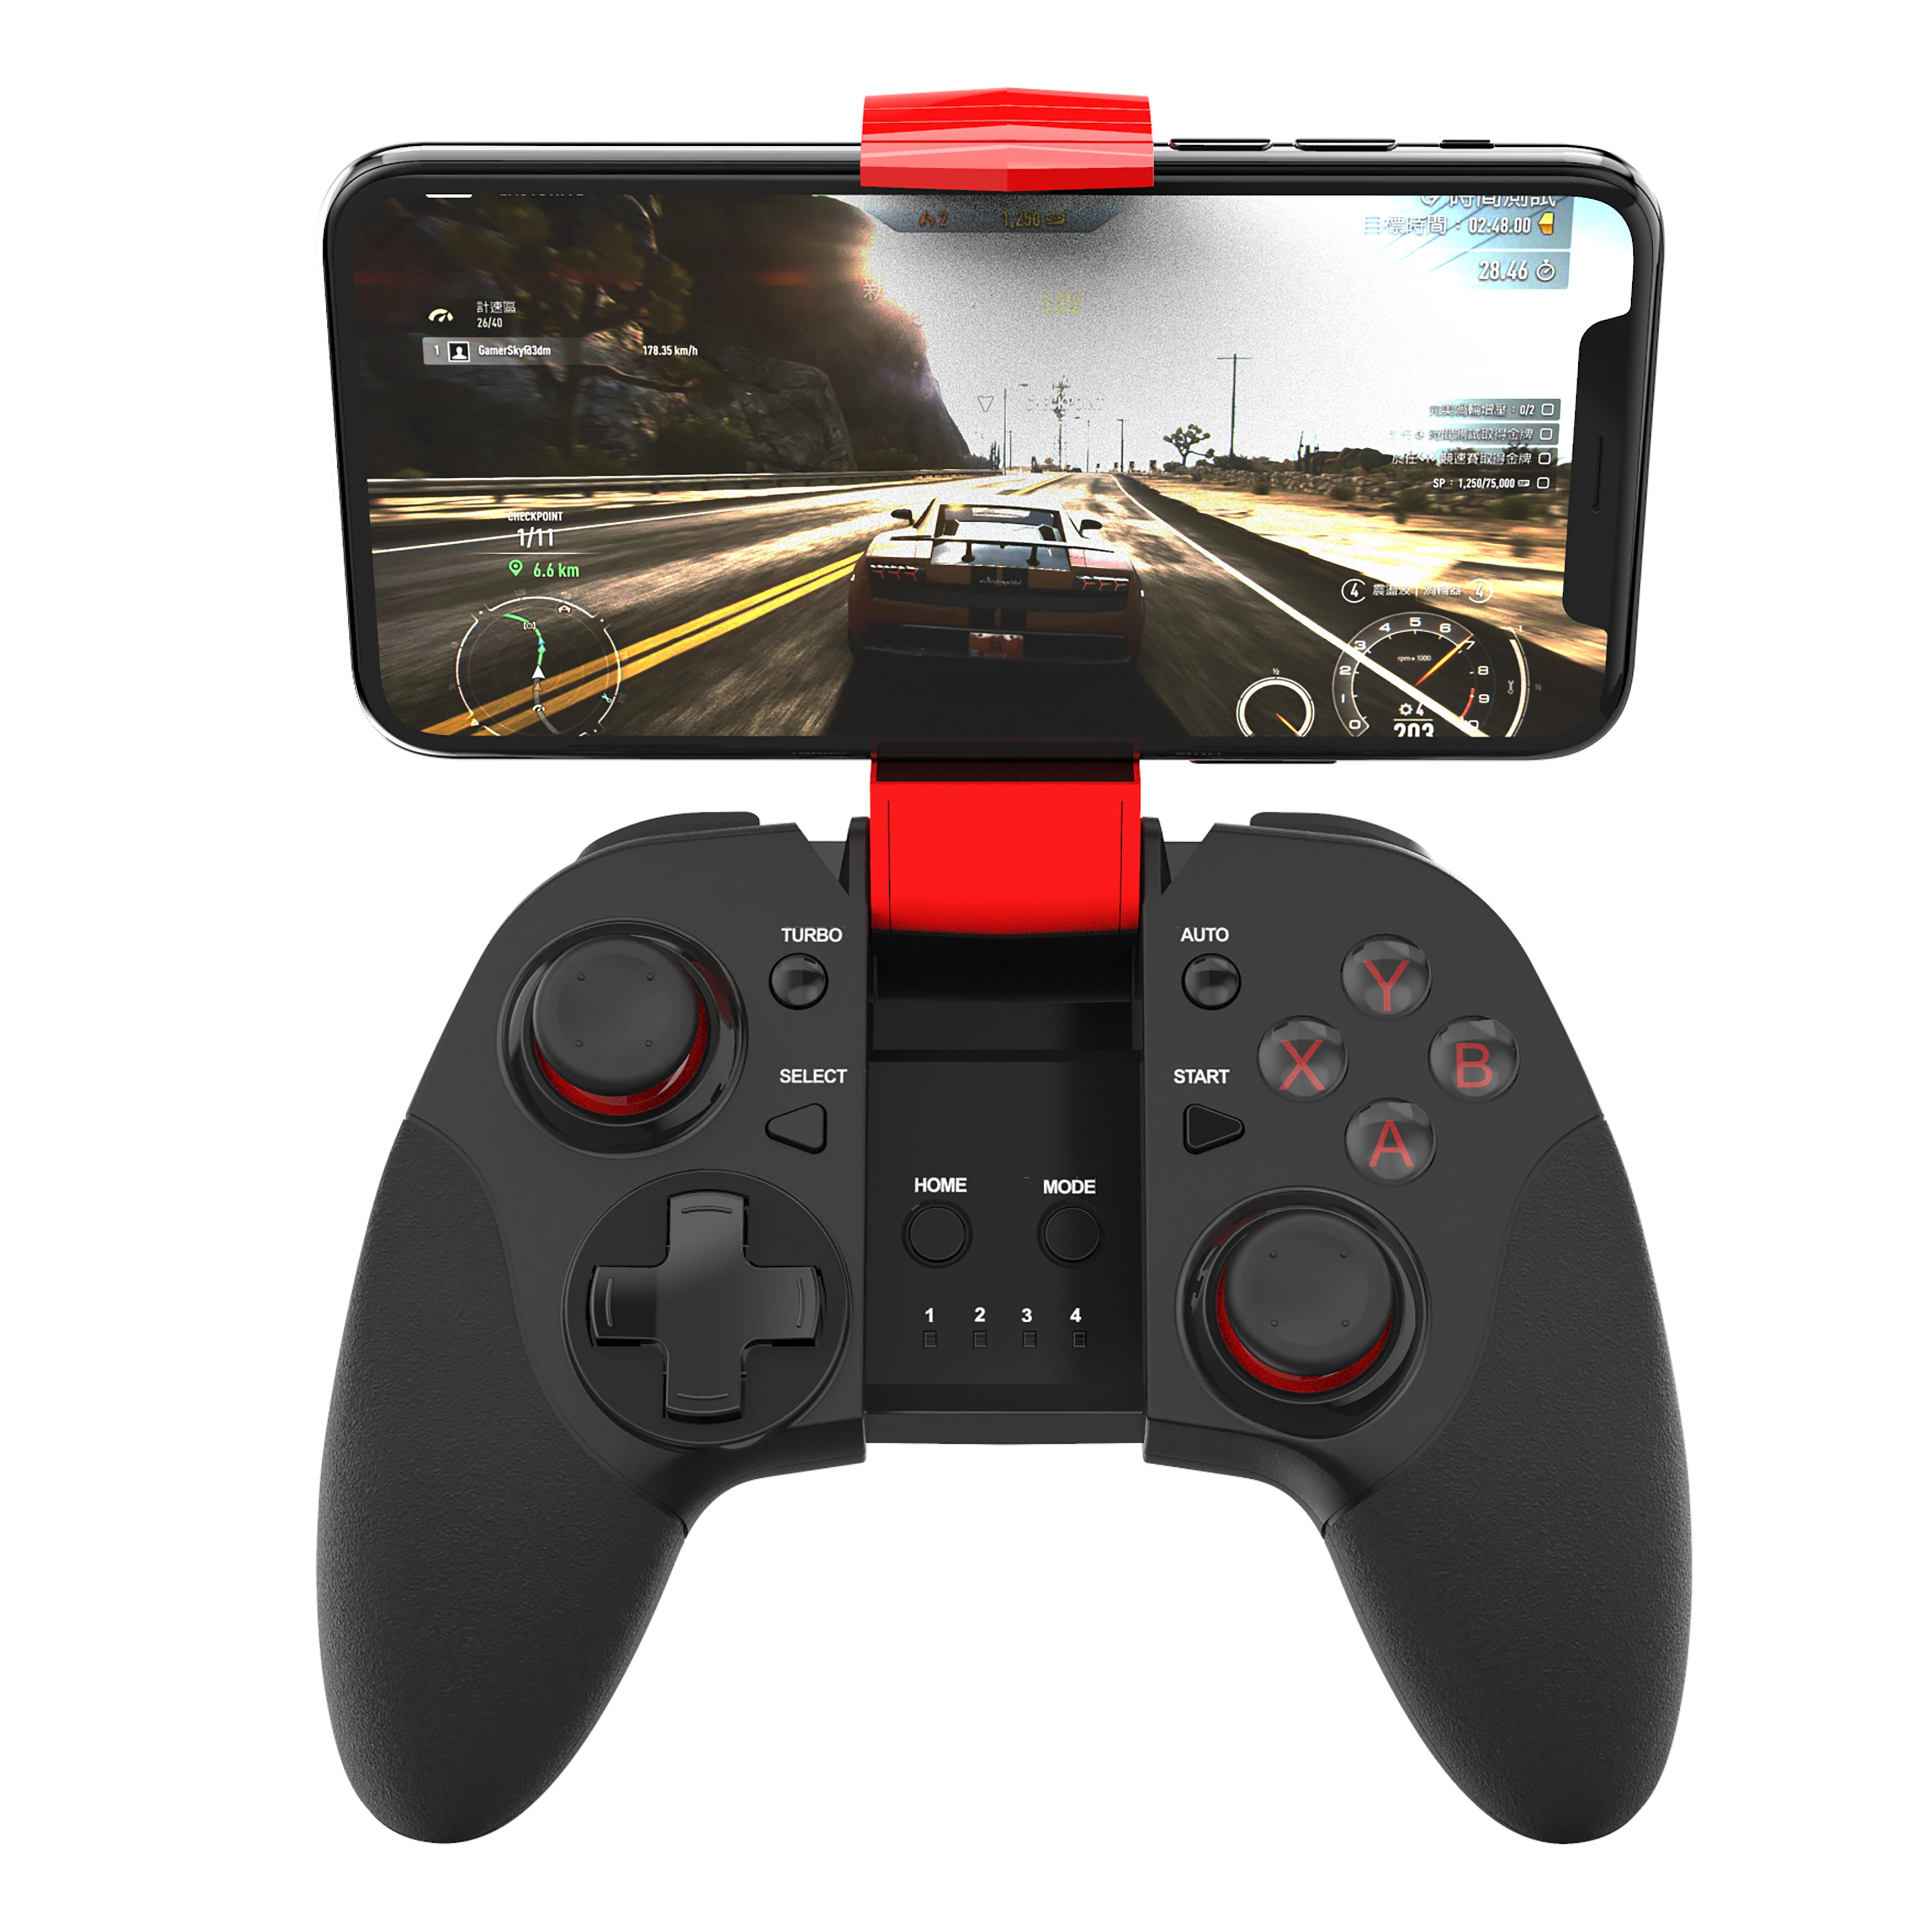 

Whole Sell Wireless Dual Vibration Android Gamepad For Nintendo Switch PC-XBOX360 PS3 Mobile Game Controller